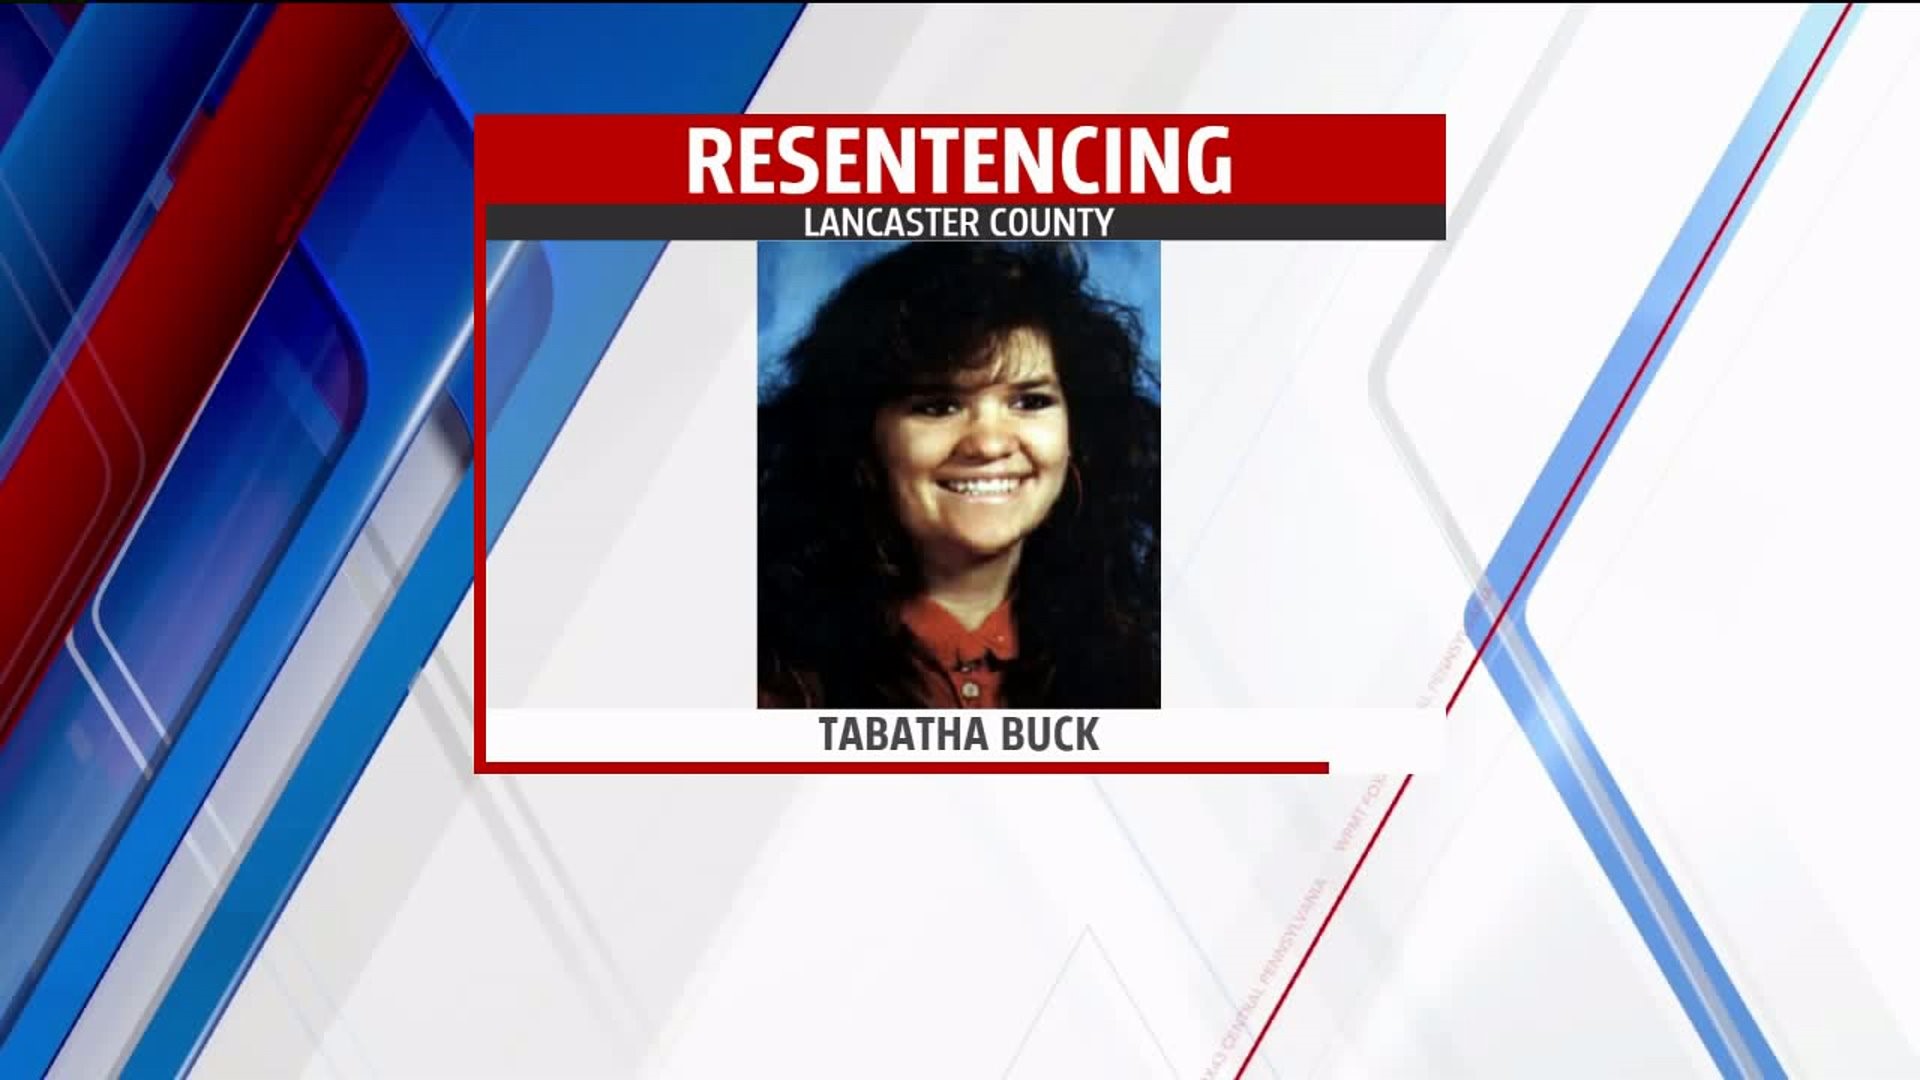 Tabatha Buck, one of the women serving a life sentence for her role in a 1991 Lancaster County murder is scheduled for a resentencing hearing this morning